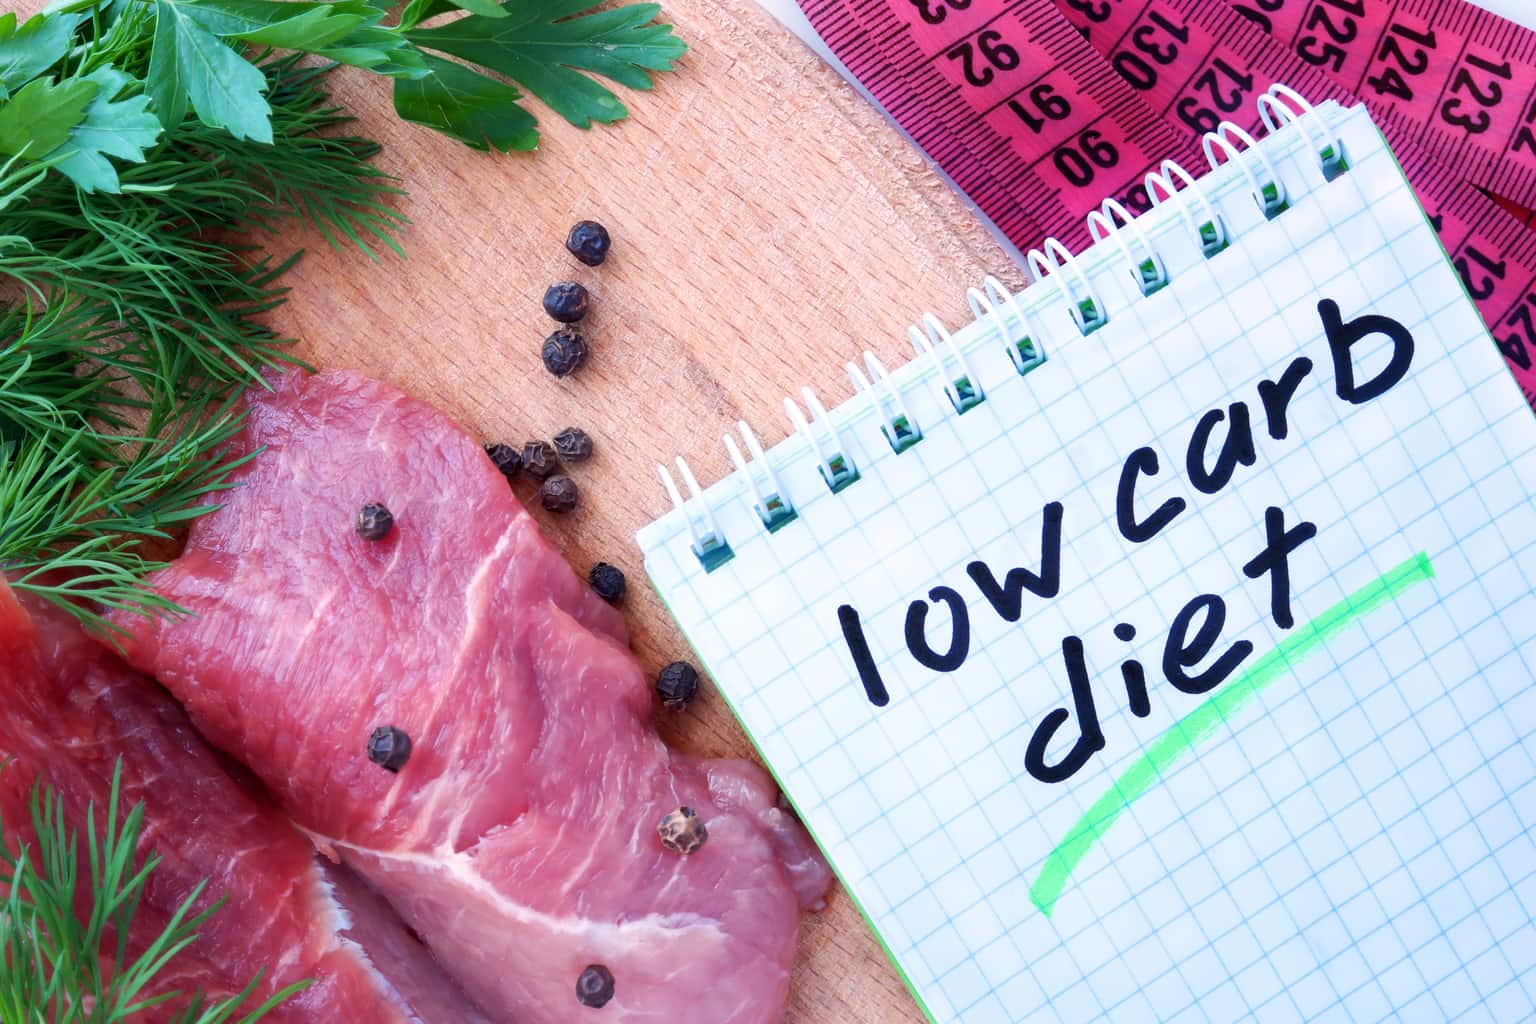 Low carb diets can harm you and kill your metabolism